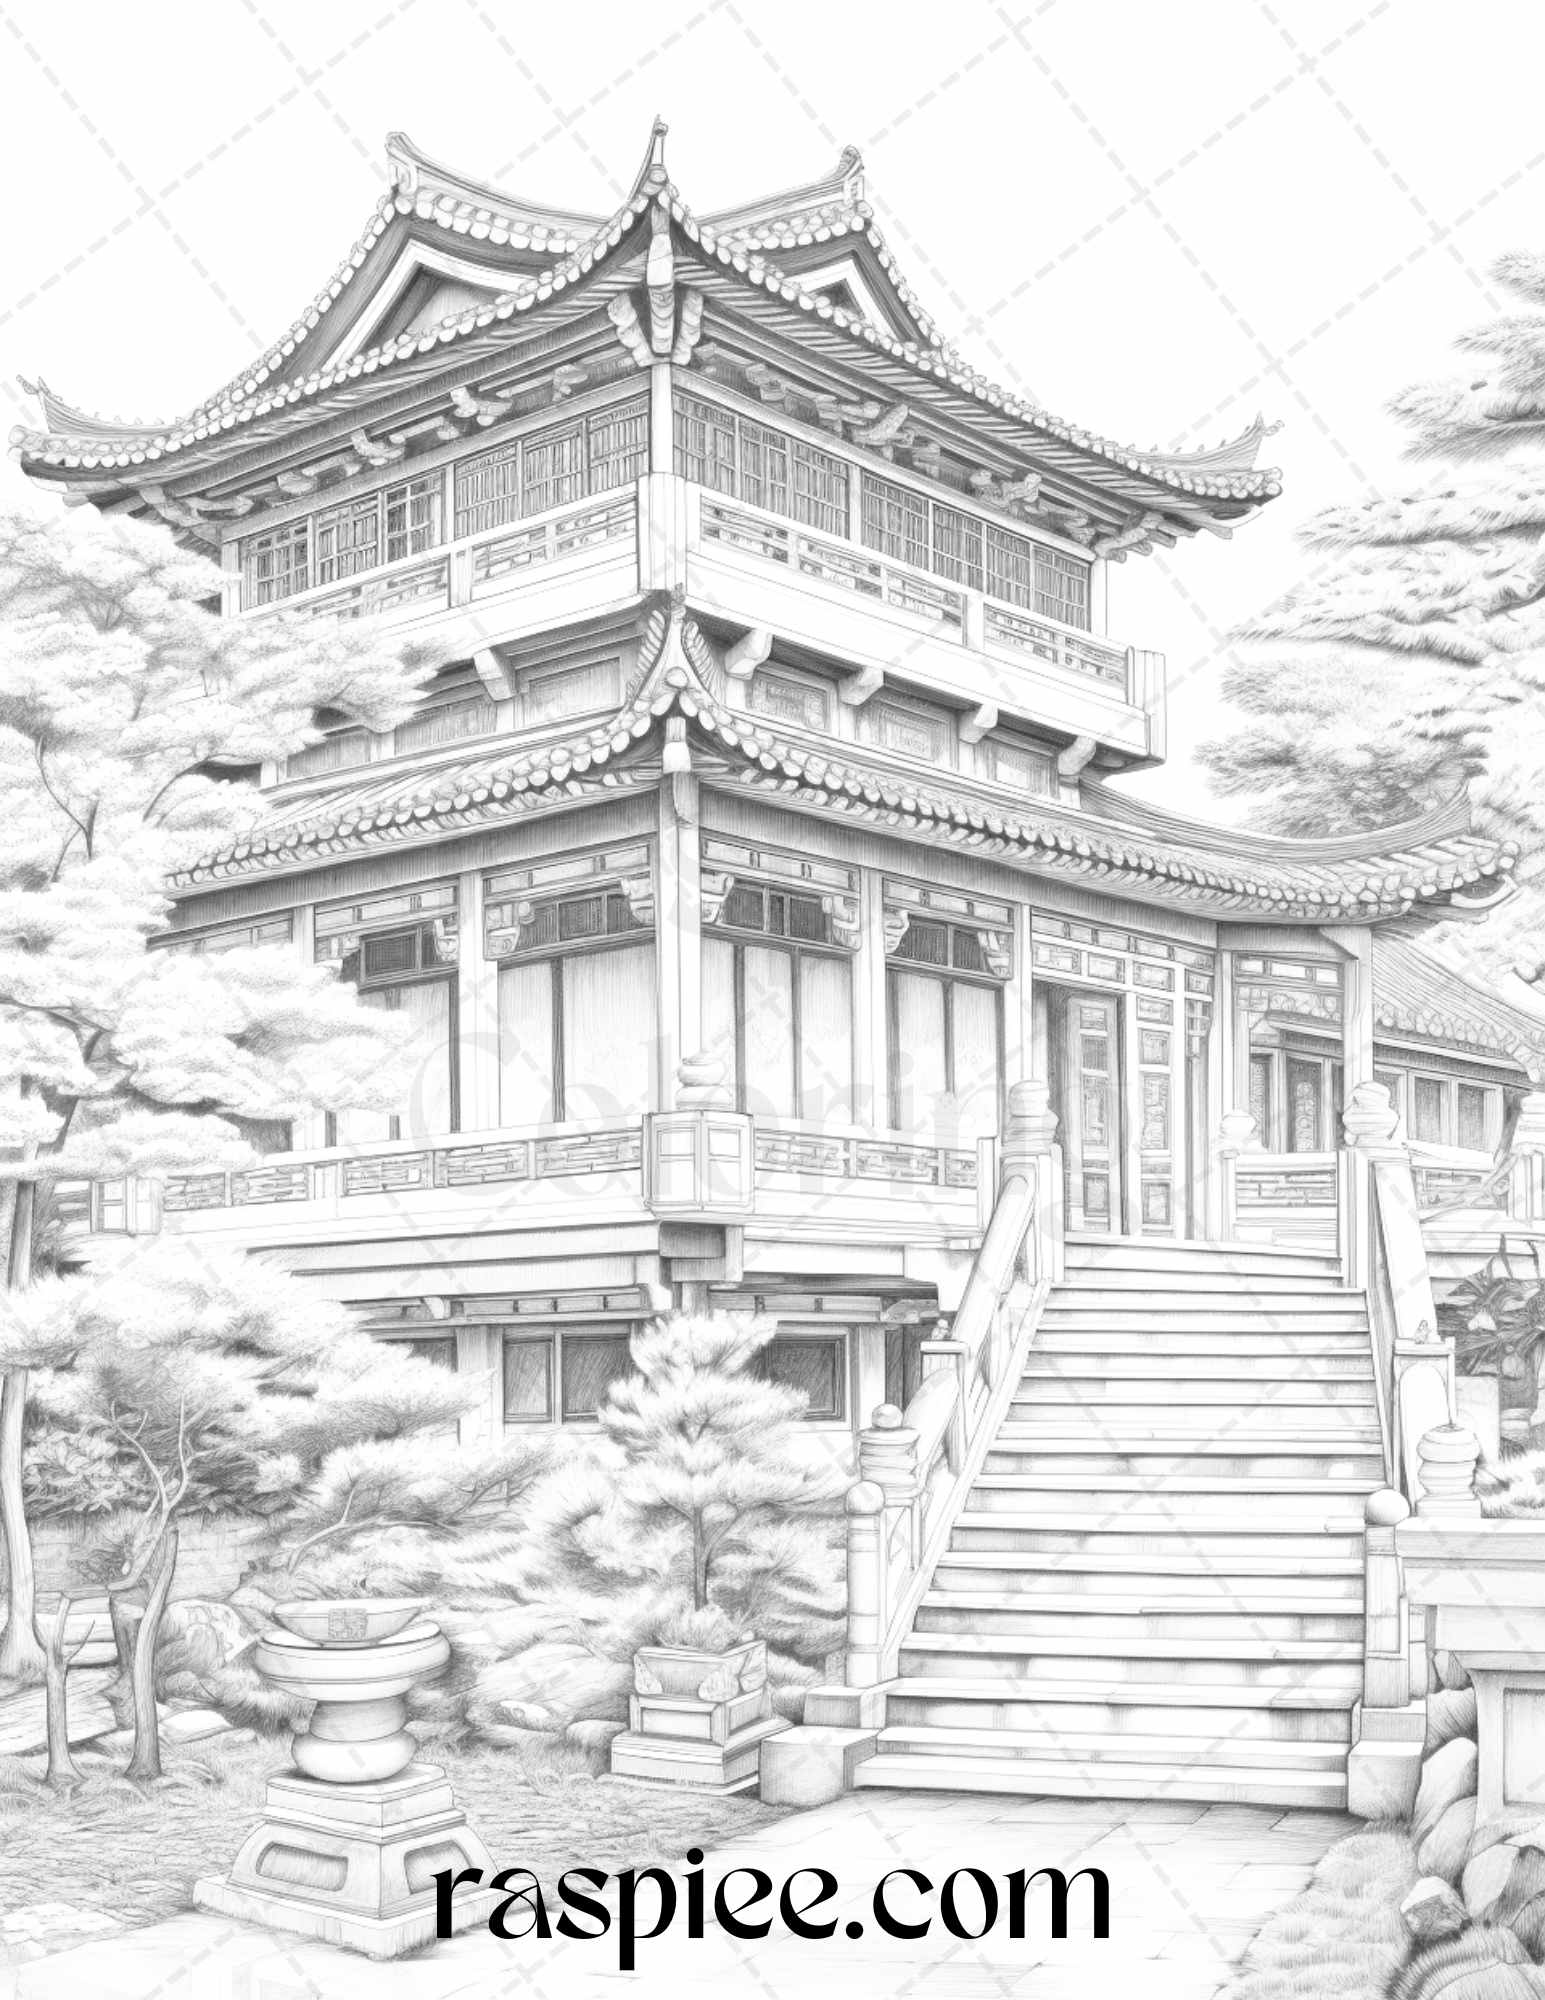 Traditional Chinese Houses Grayscale Coloring Pages, Printable Adult Coloring, Instant Download Art, Detailed Grayscale Images, Mindful Coloring Pages, DIY Stress Relief Art, Creative Coloring Sheets, Traditional Cultural Art